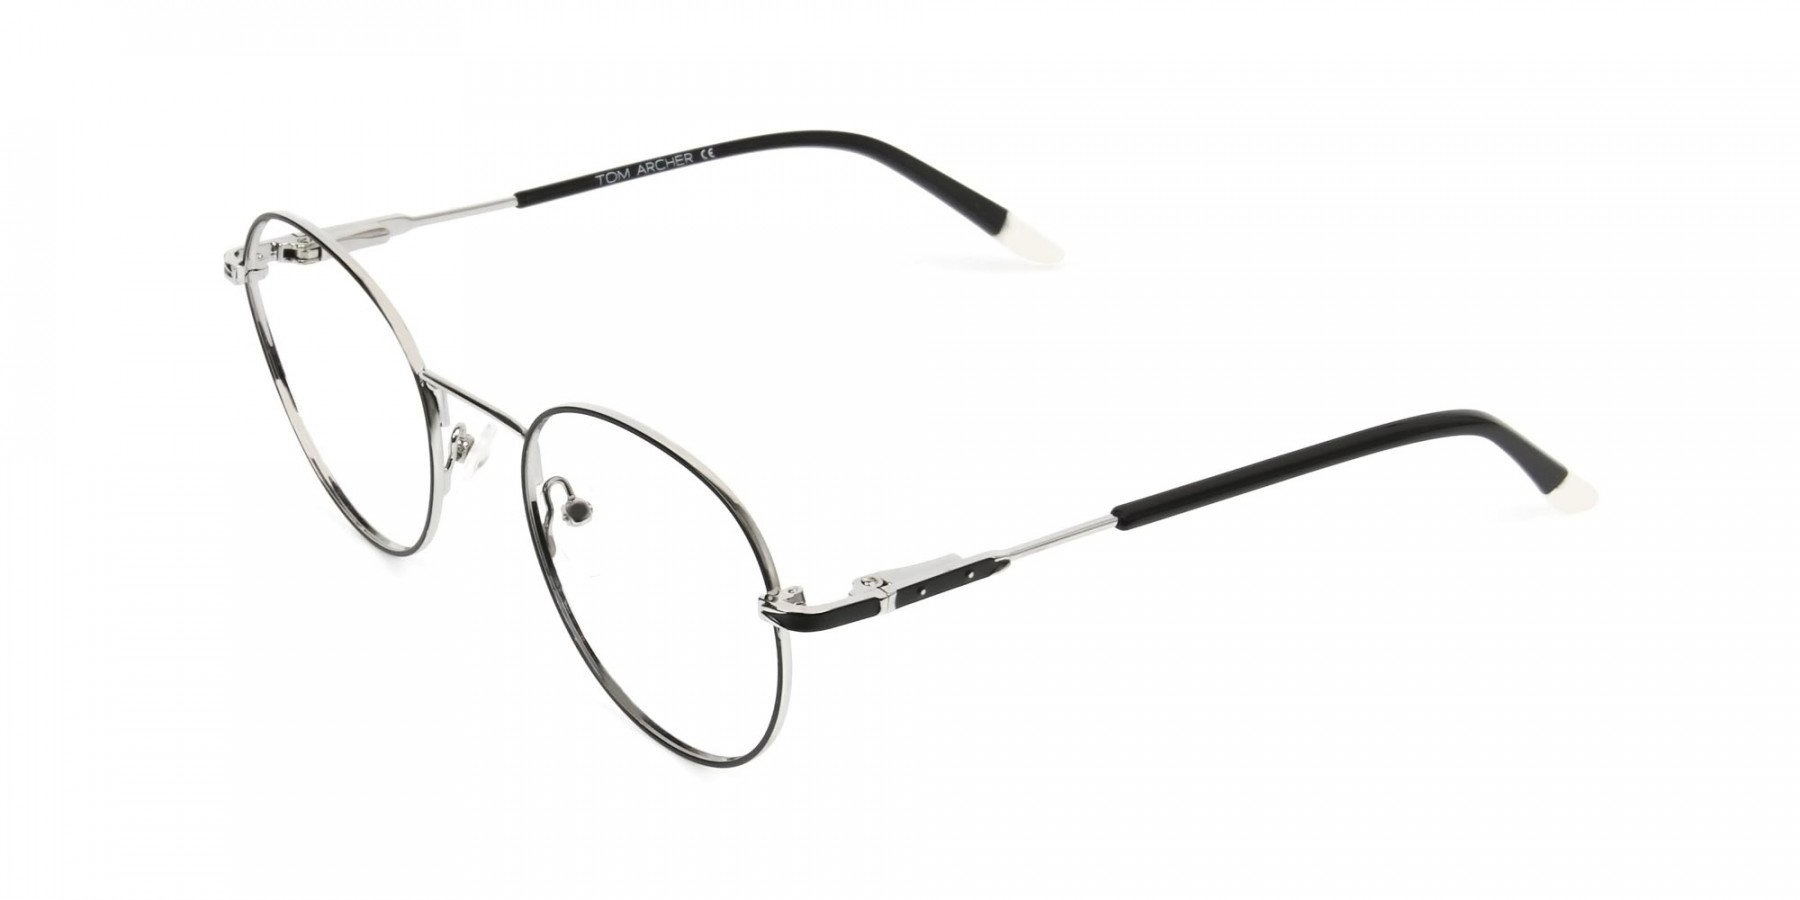 Black & Silver Round Spectacles - 1